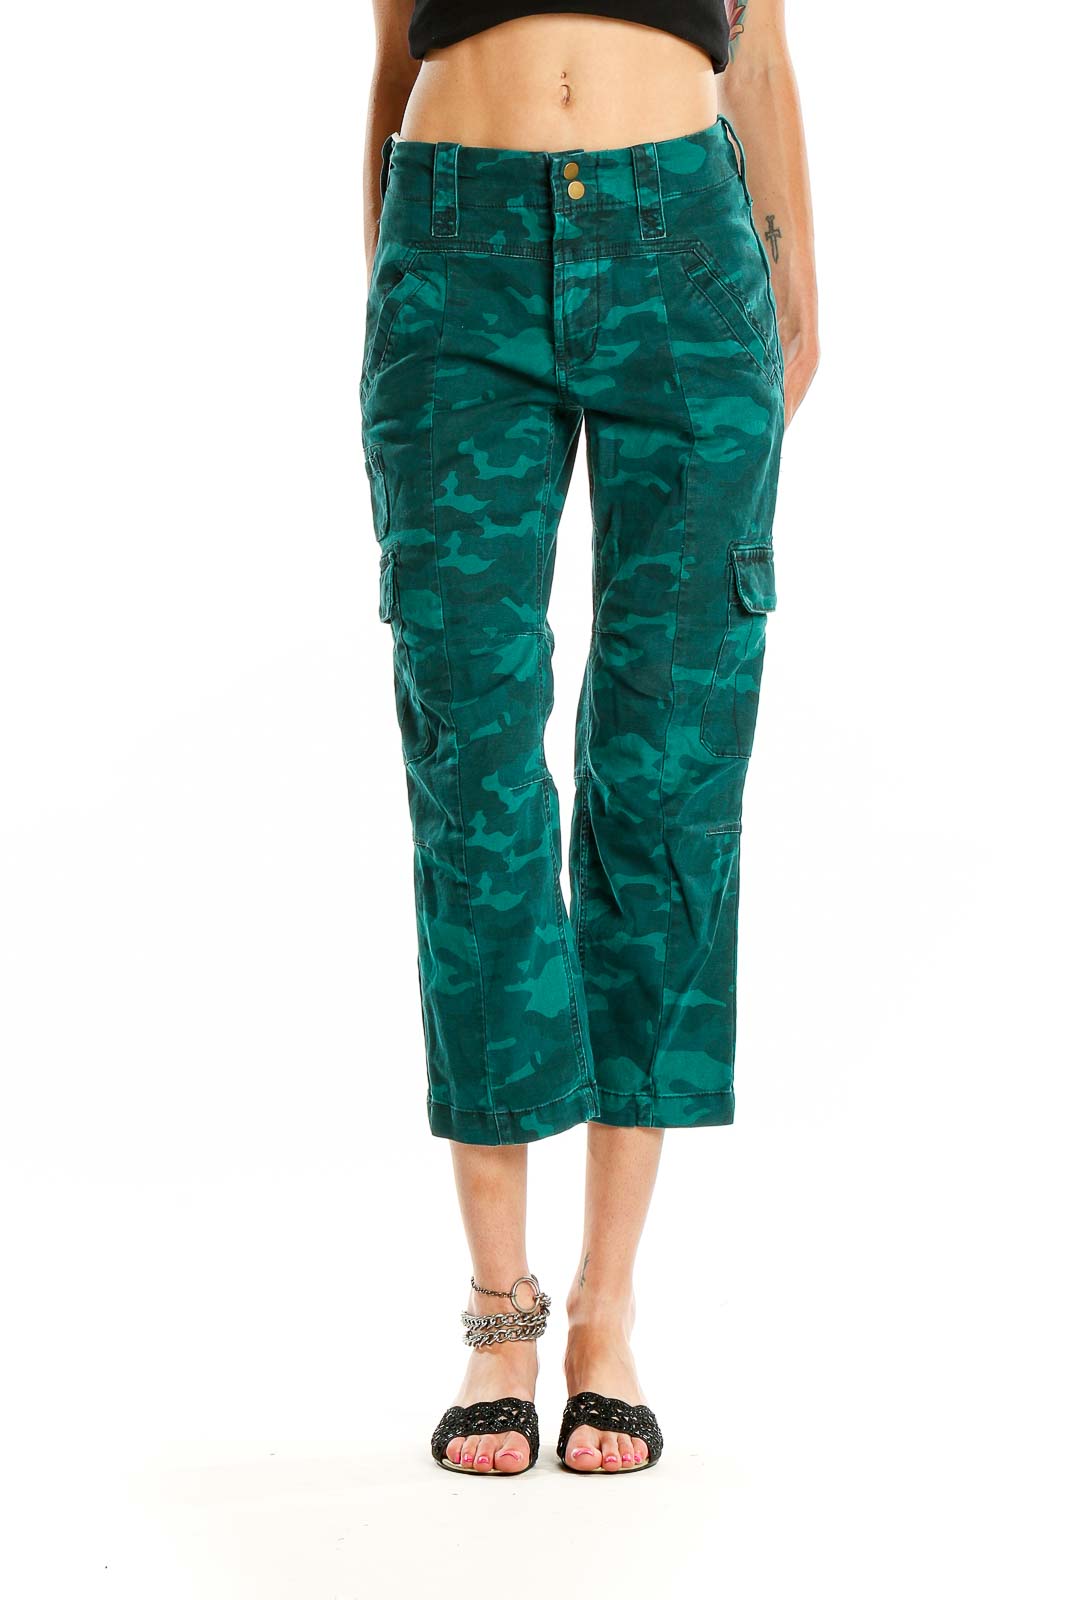 Green Camouflage Print All Day Wear Cargos Pants Front